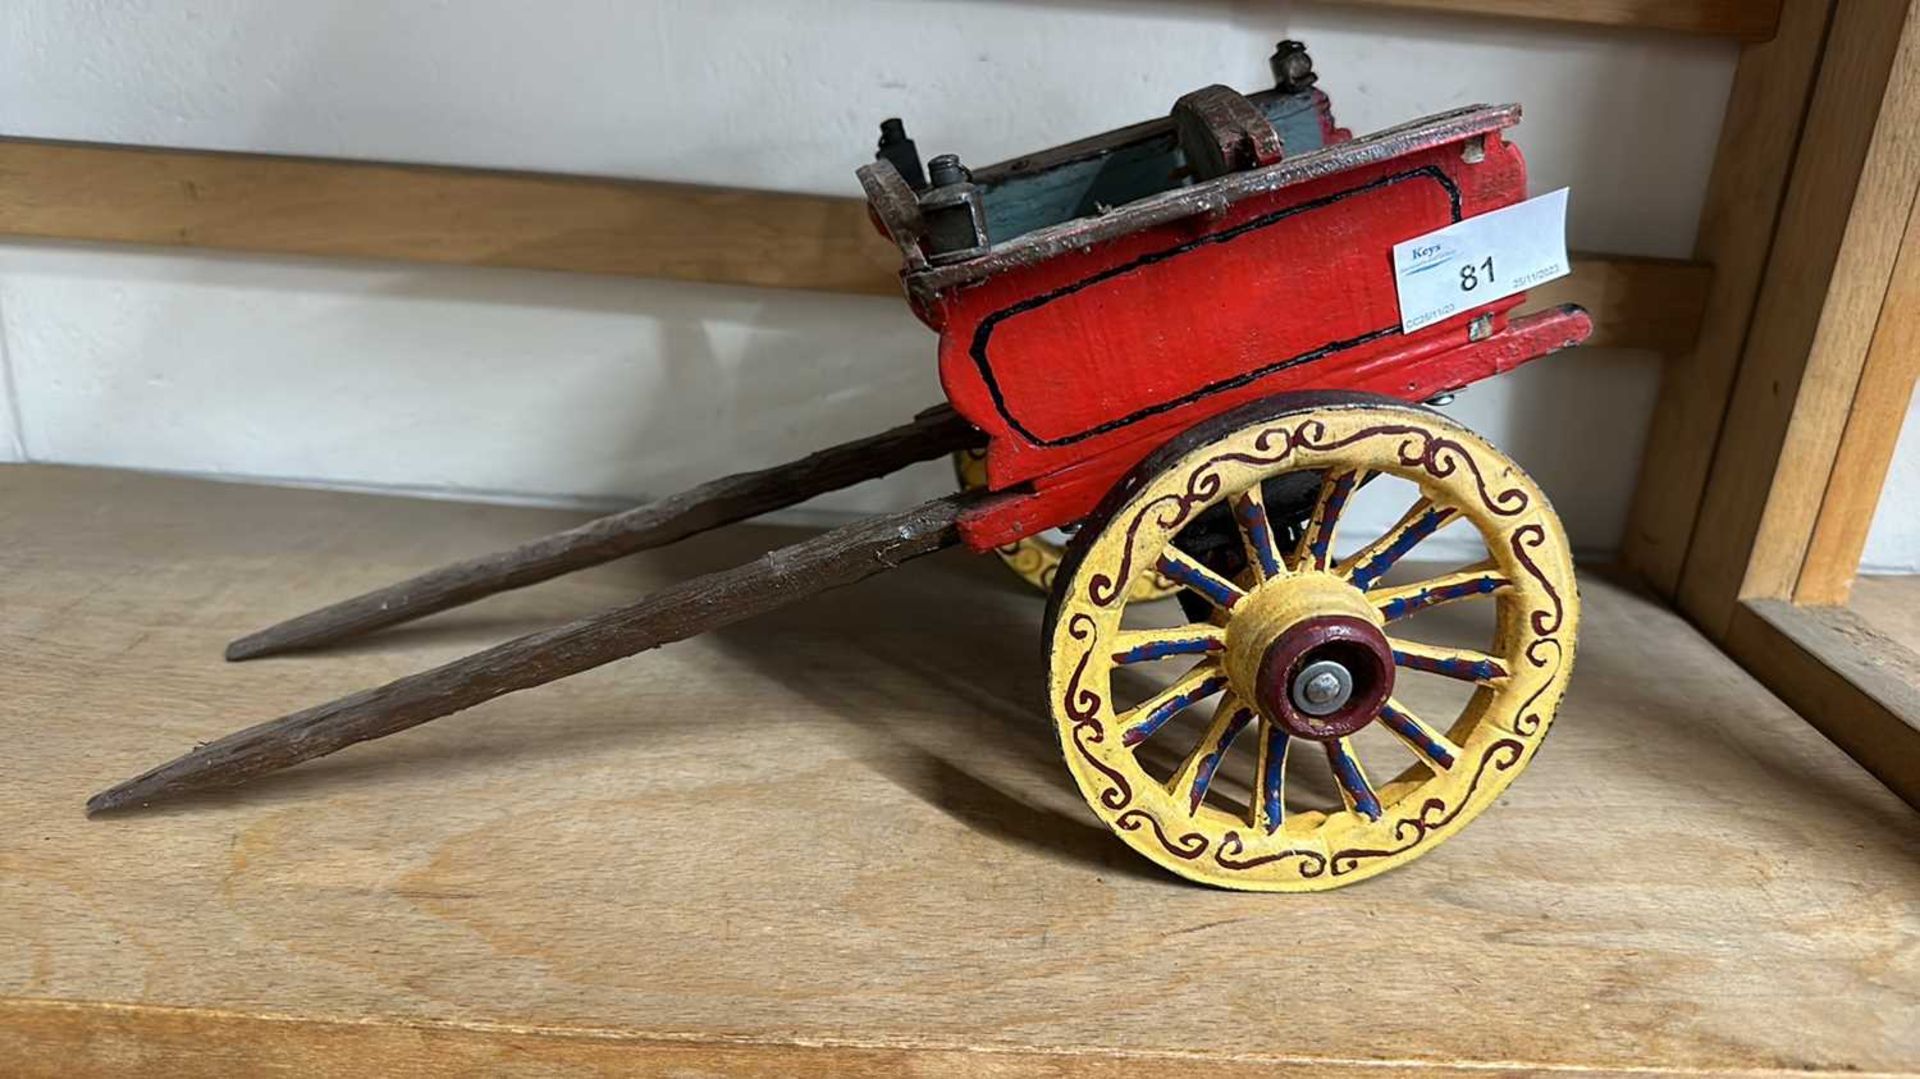 A scratch built model of a small single axle cart, painted in red and yellow, approx 34cm long